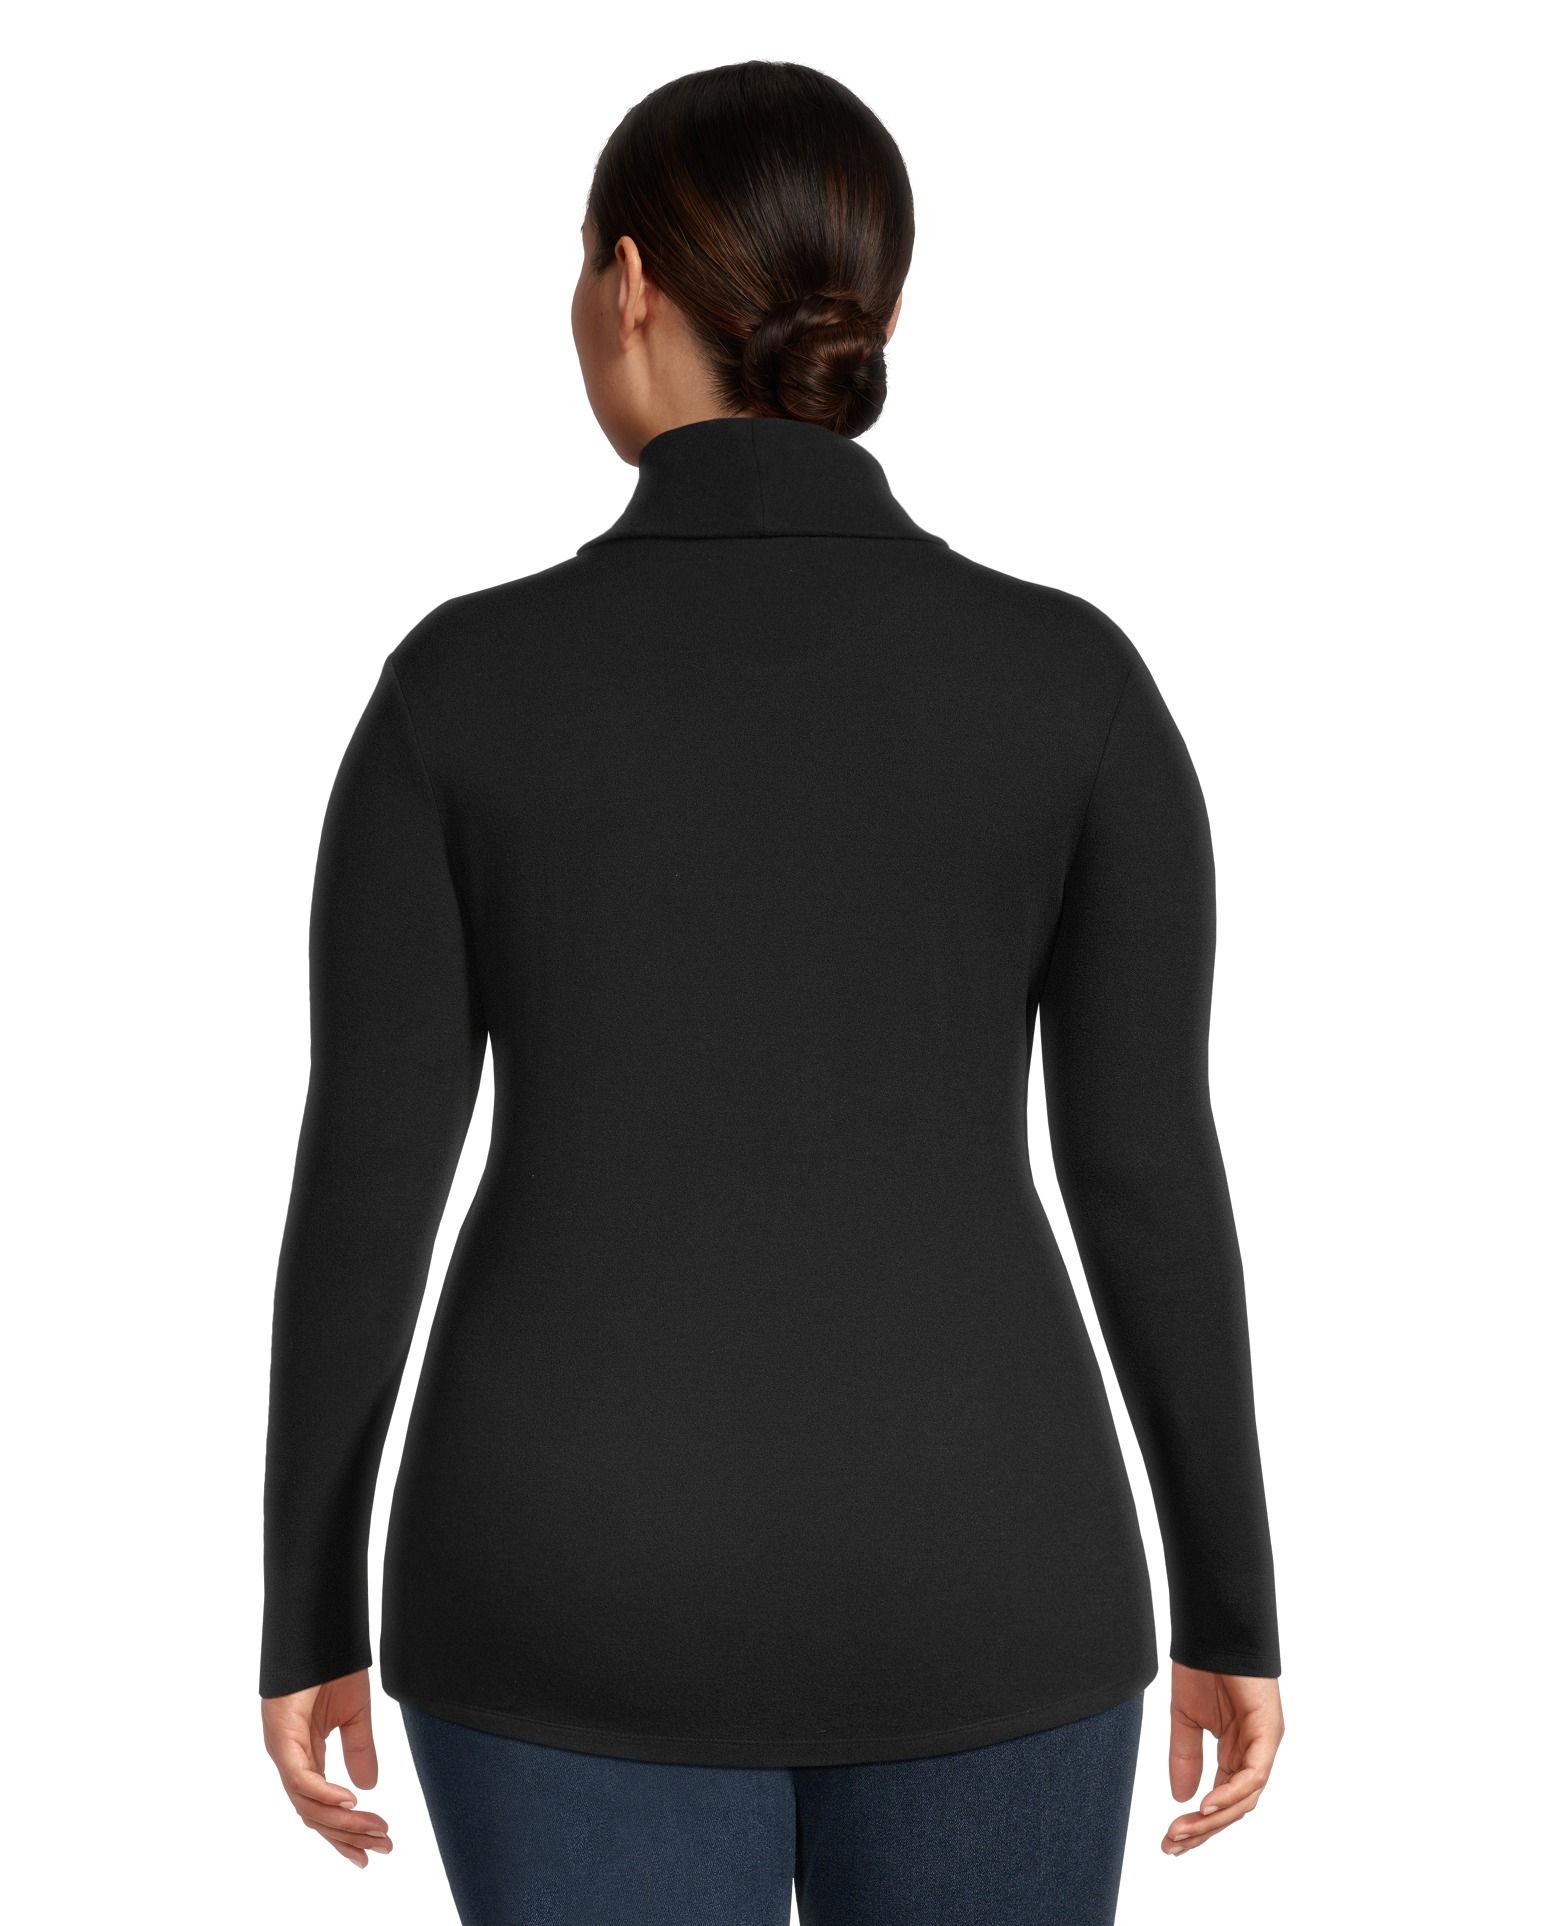 Shoppers Love This $25 Women's Turtleneck